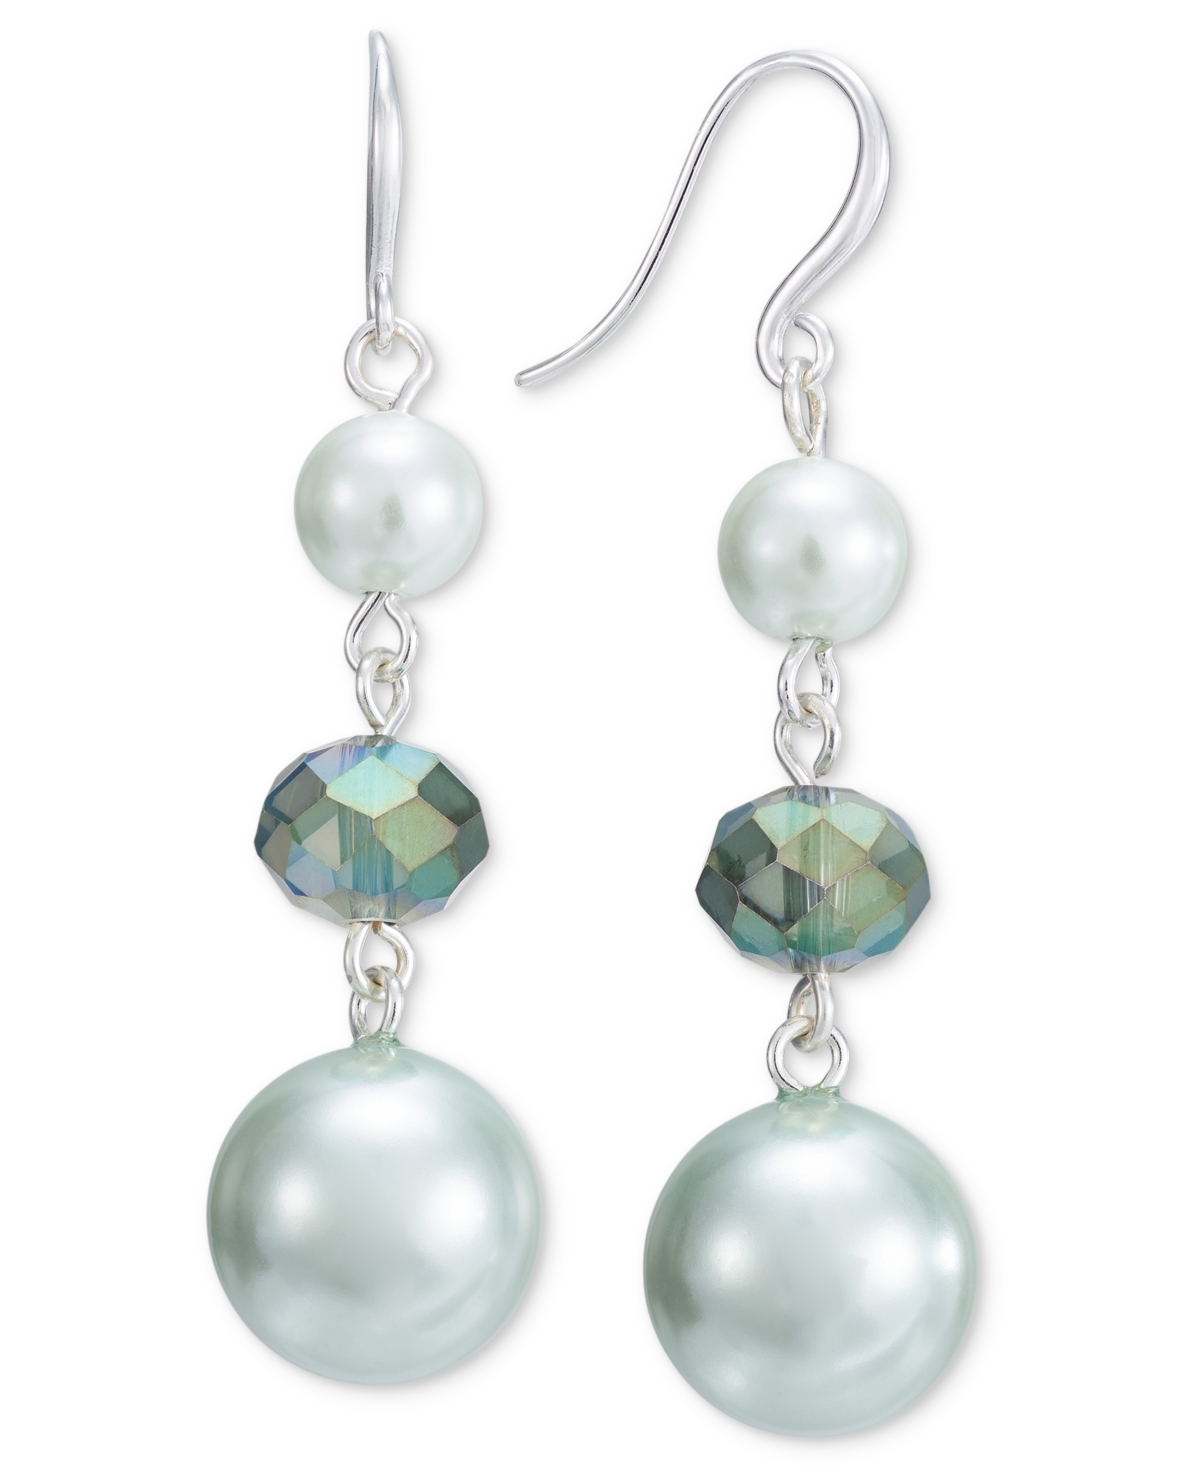 Silver-Tone Color Bead & Imitation Pearl Triple Drop Earrings, Created for Macy's - Green